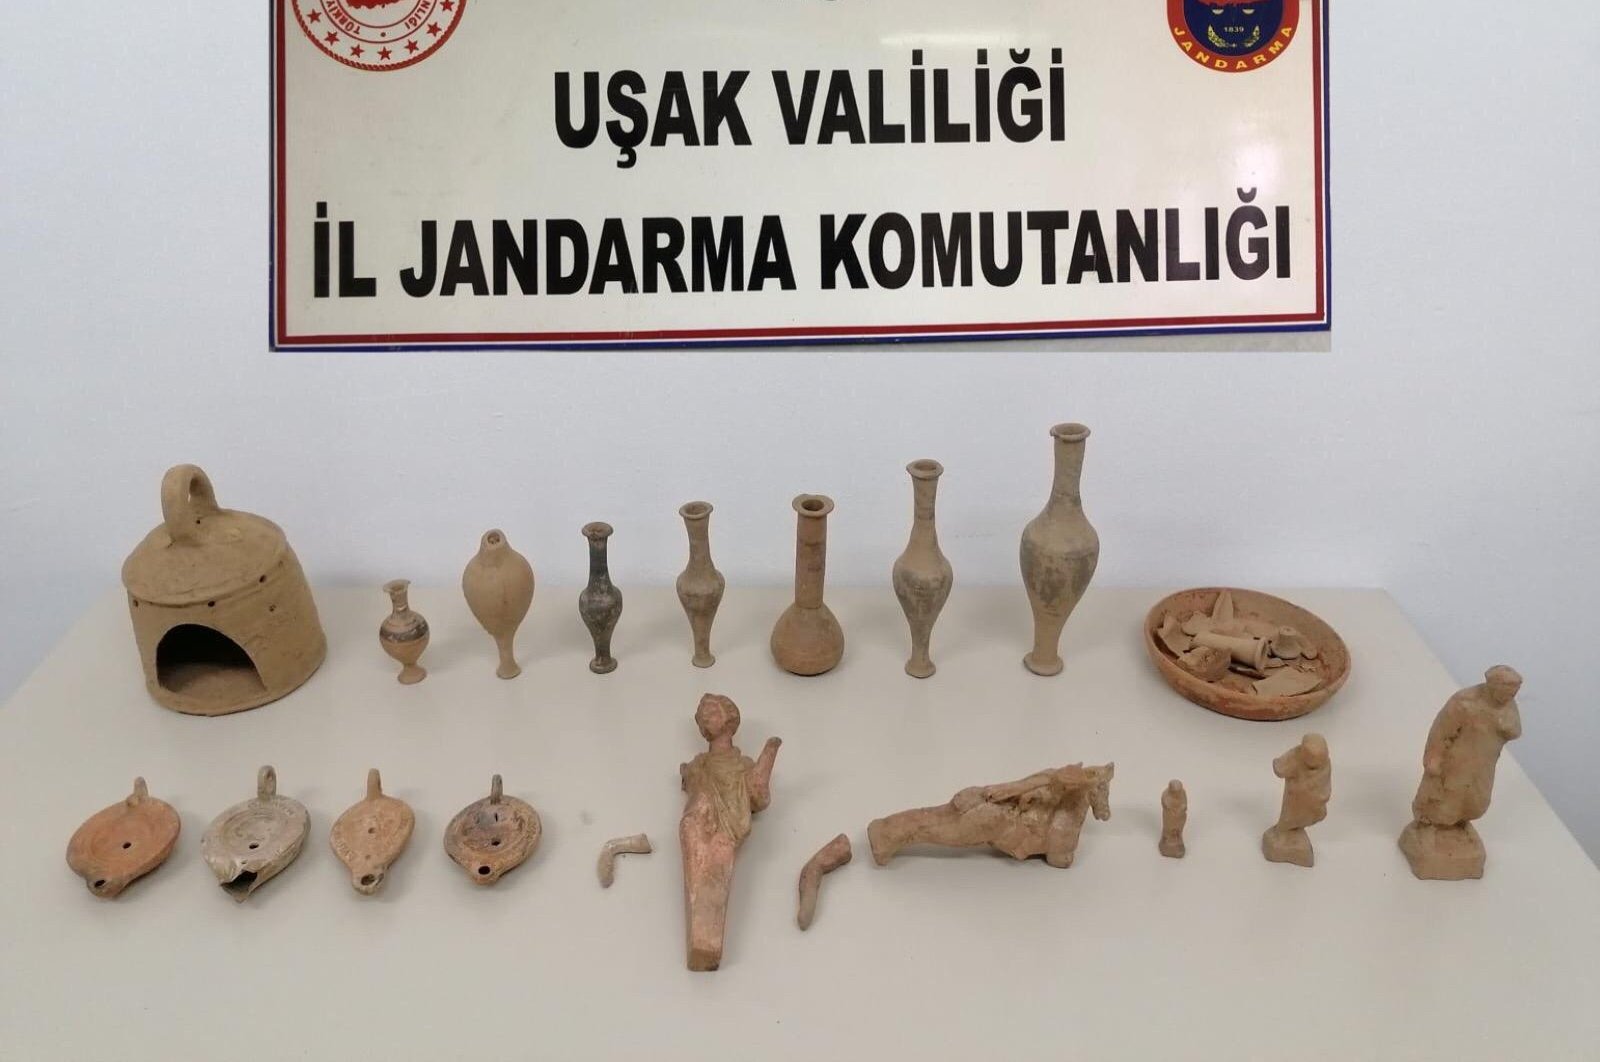 The 18 artifacts seized by gendarmerie units in Uşak, Oct. 12, 2020. (AA Photo)